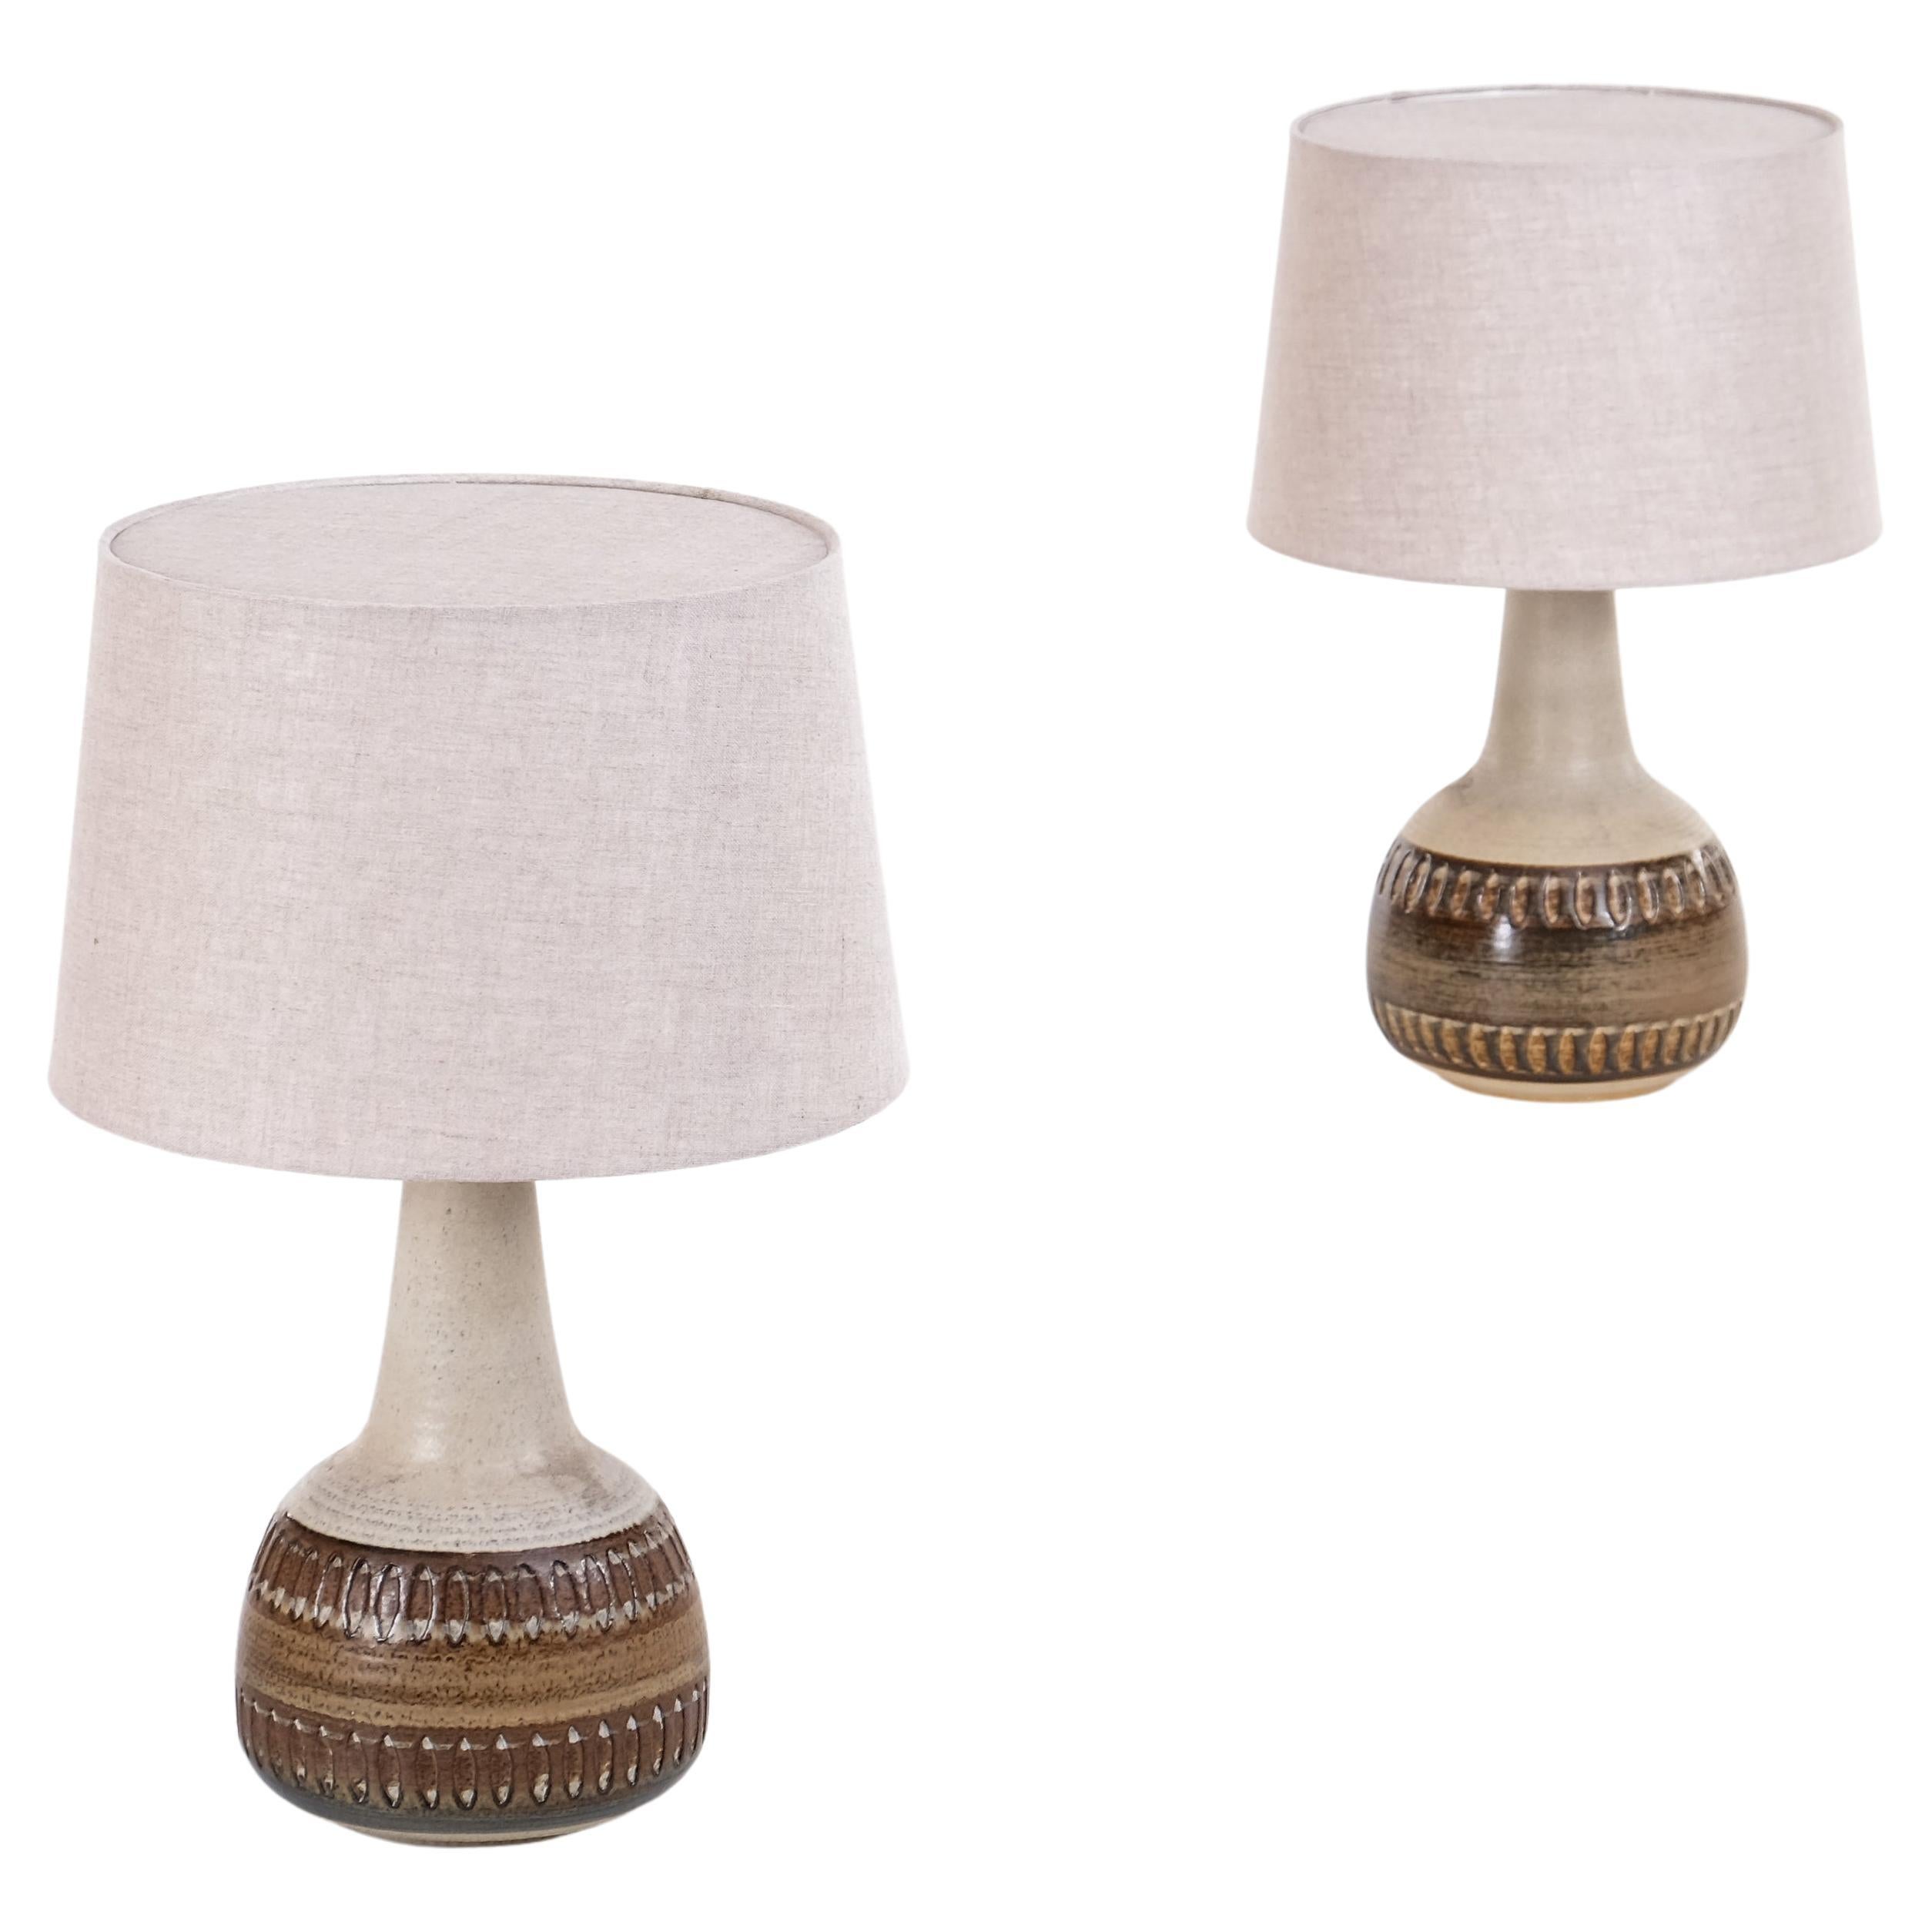 Pair of Table Lamps by Søholm Keramik, Denmark, 1960s For Sale